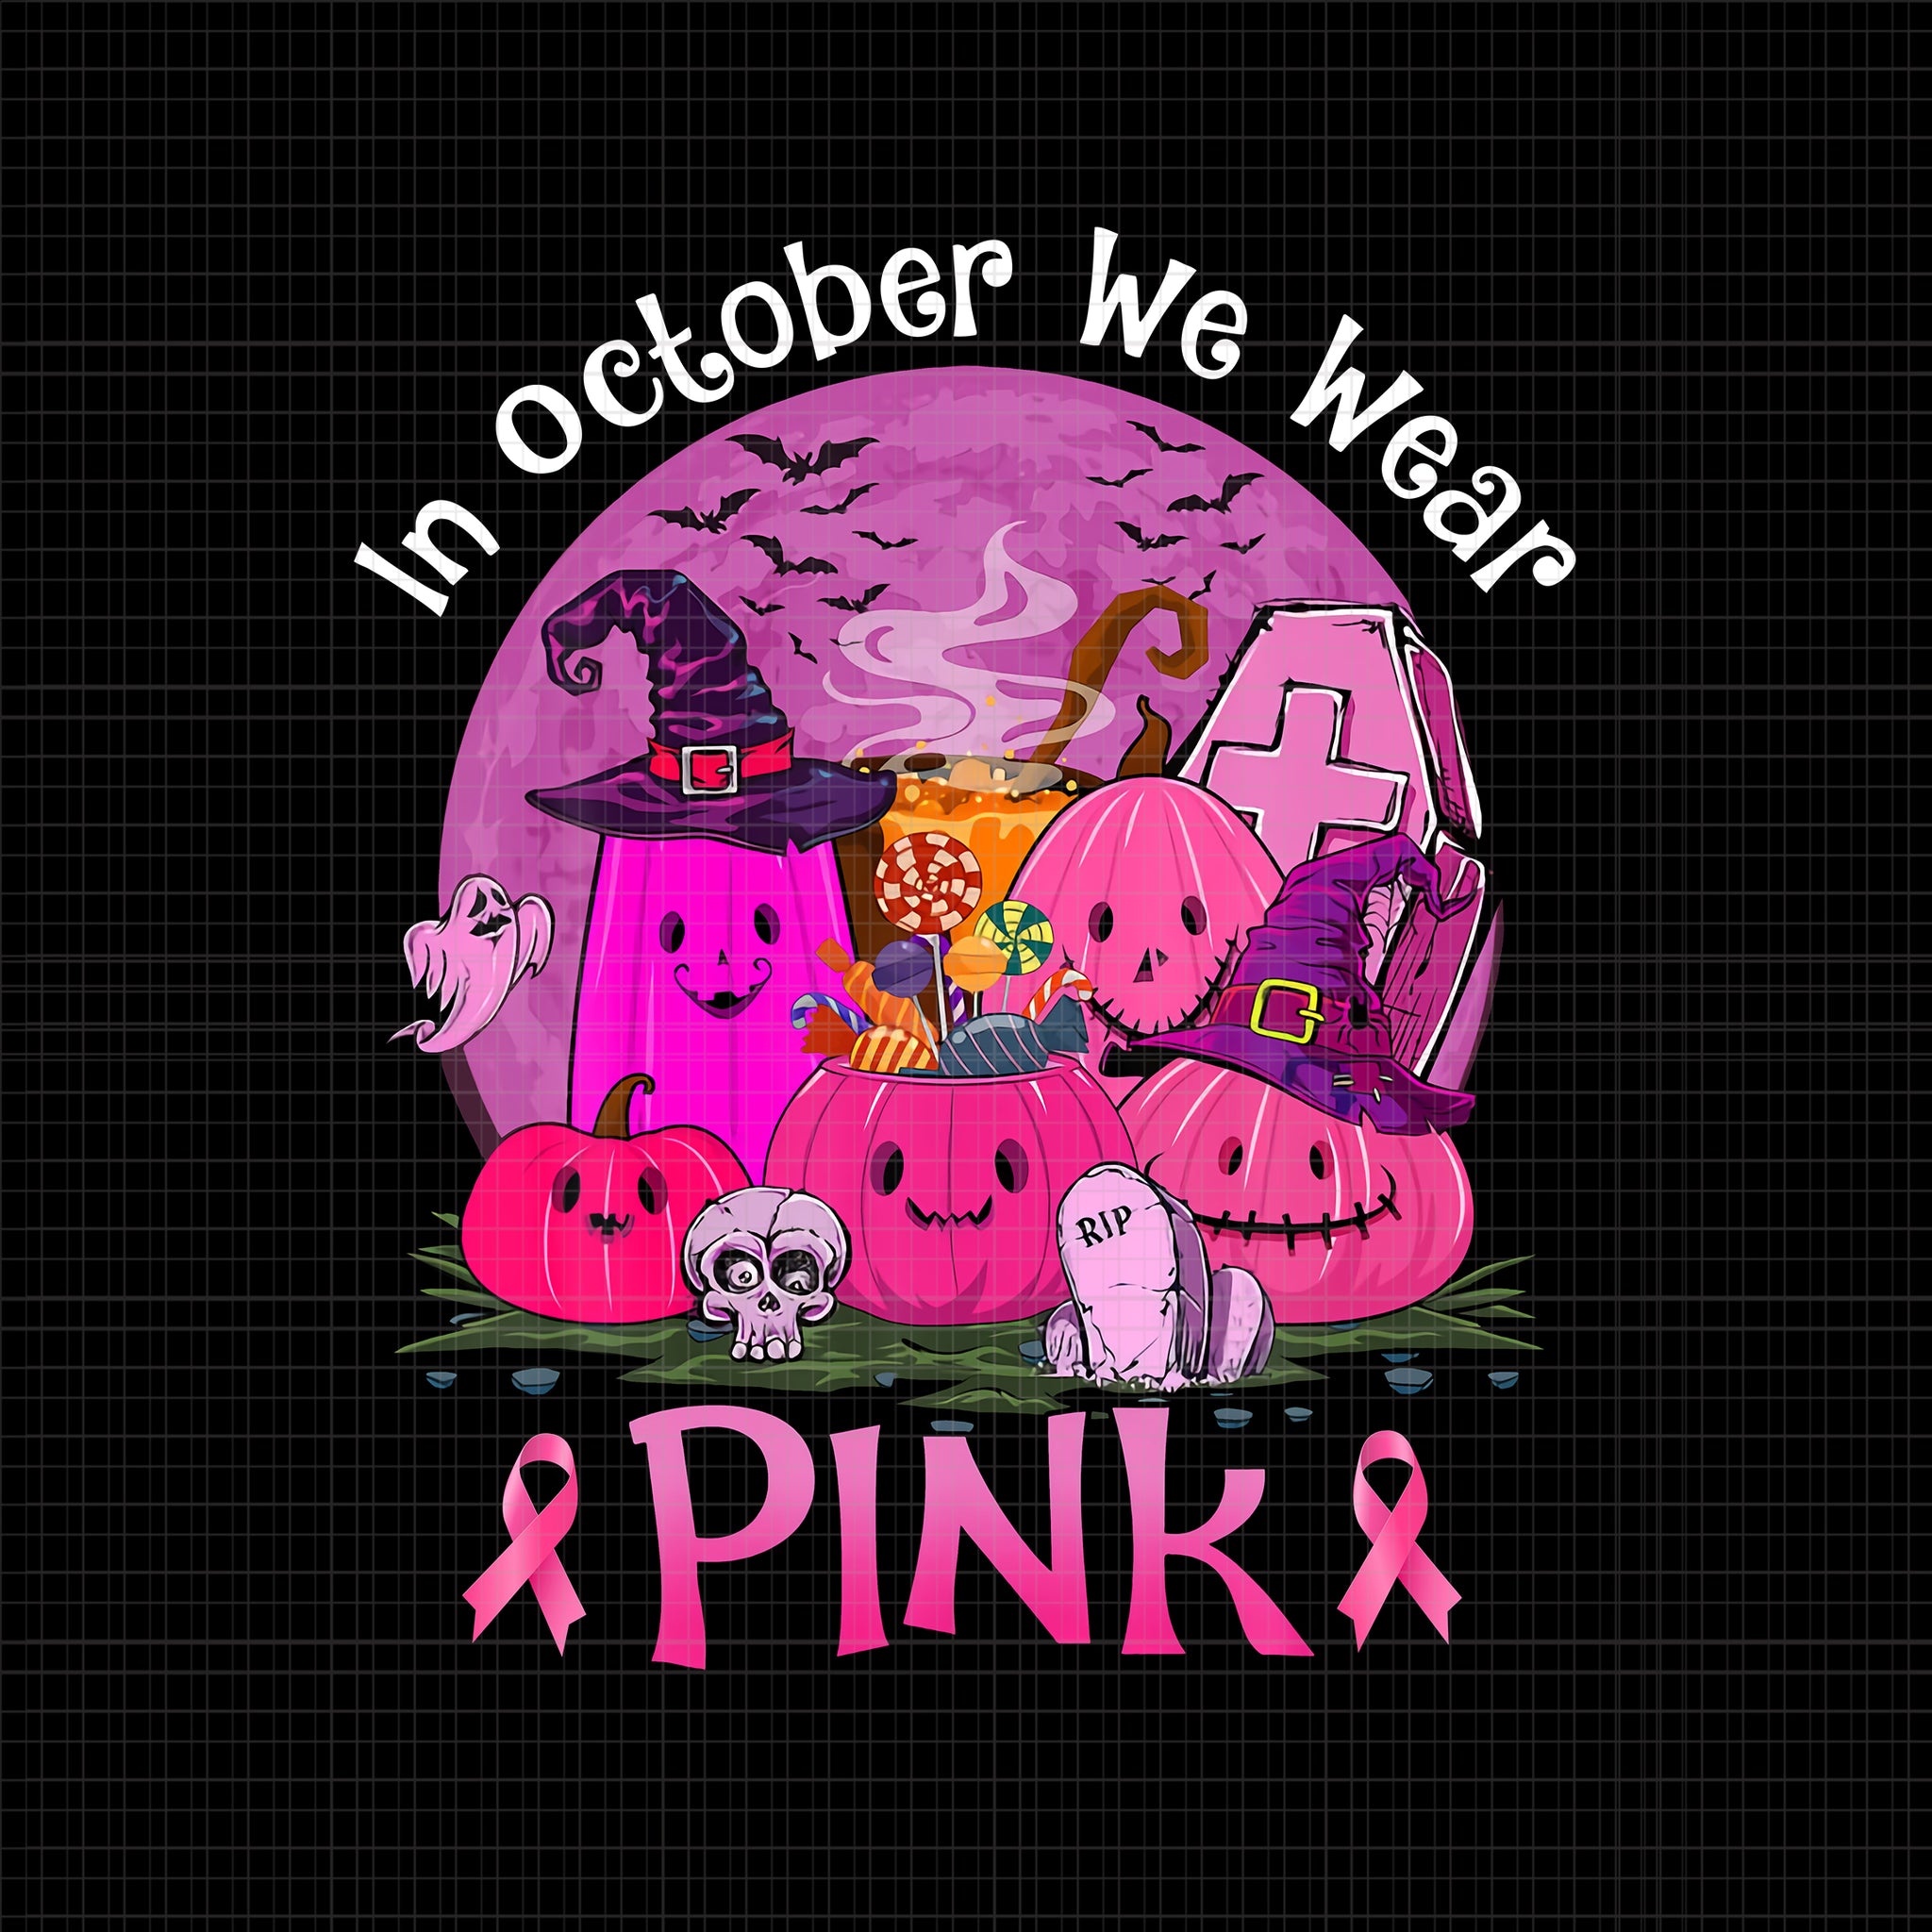 In October We Wear Pink Png, Pink Boo, Breast Cancer Awareness png, Pink Cancer Warrior png, Pink Ribbon, Halloween Pumpkin, Pink Ribbon Png, Autumn Png